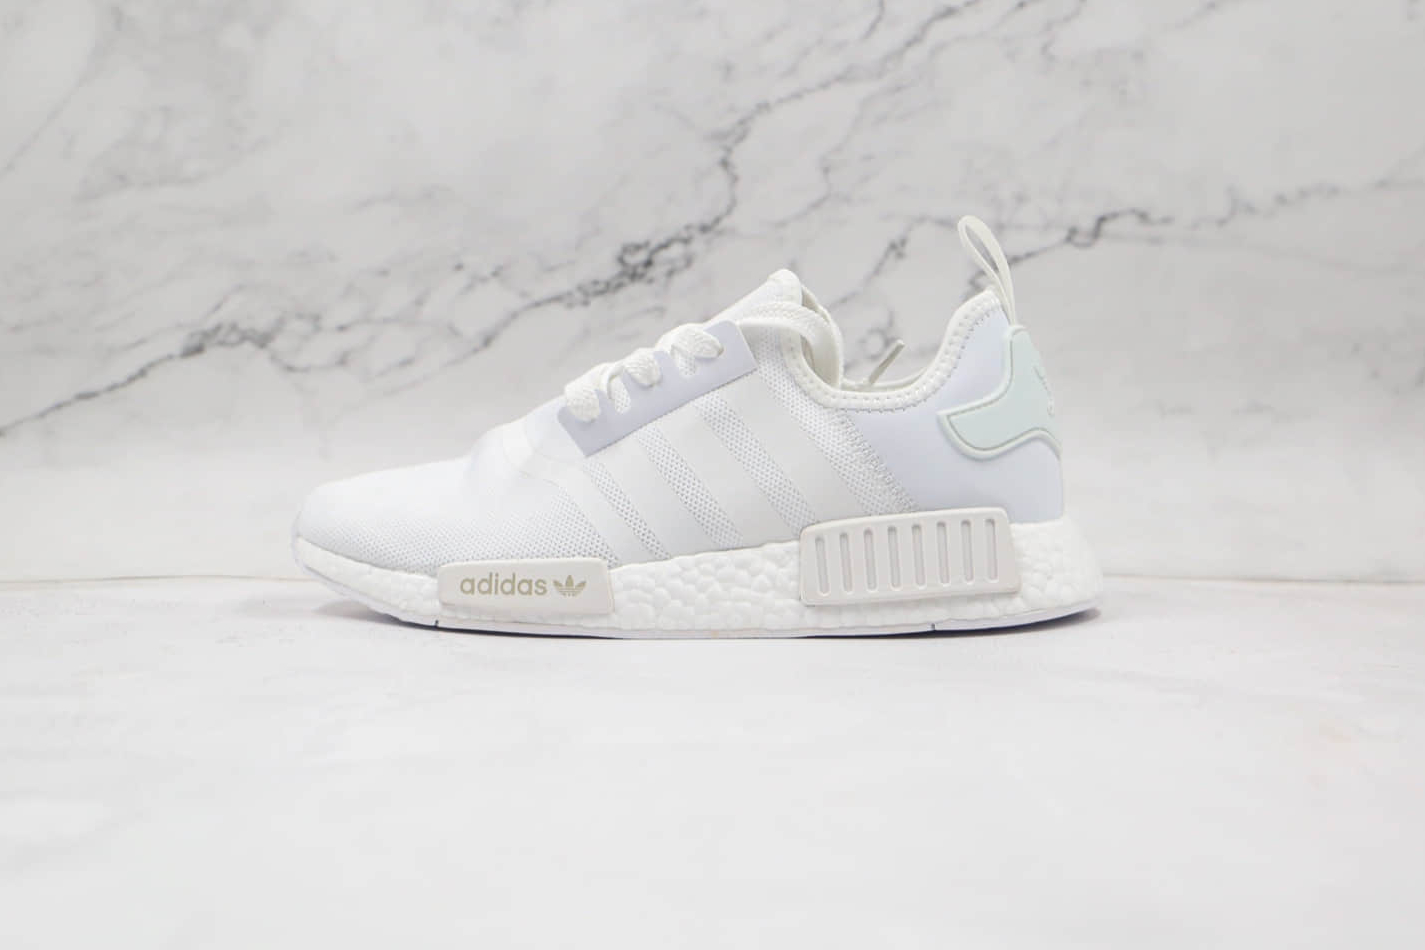 Adidas Originals NMD_R1 'White Reflective' - Stylish and High-Quality Sneakers